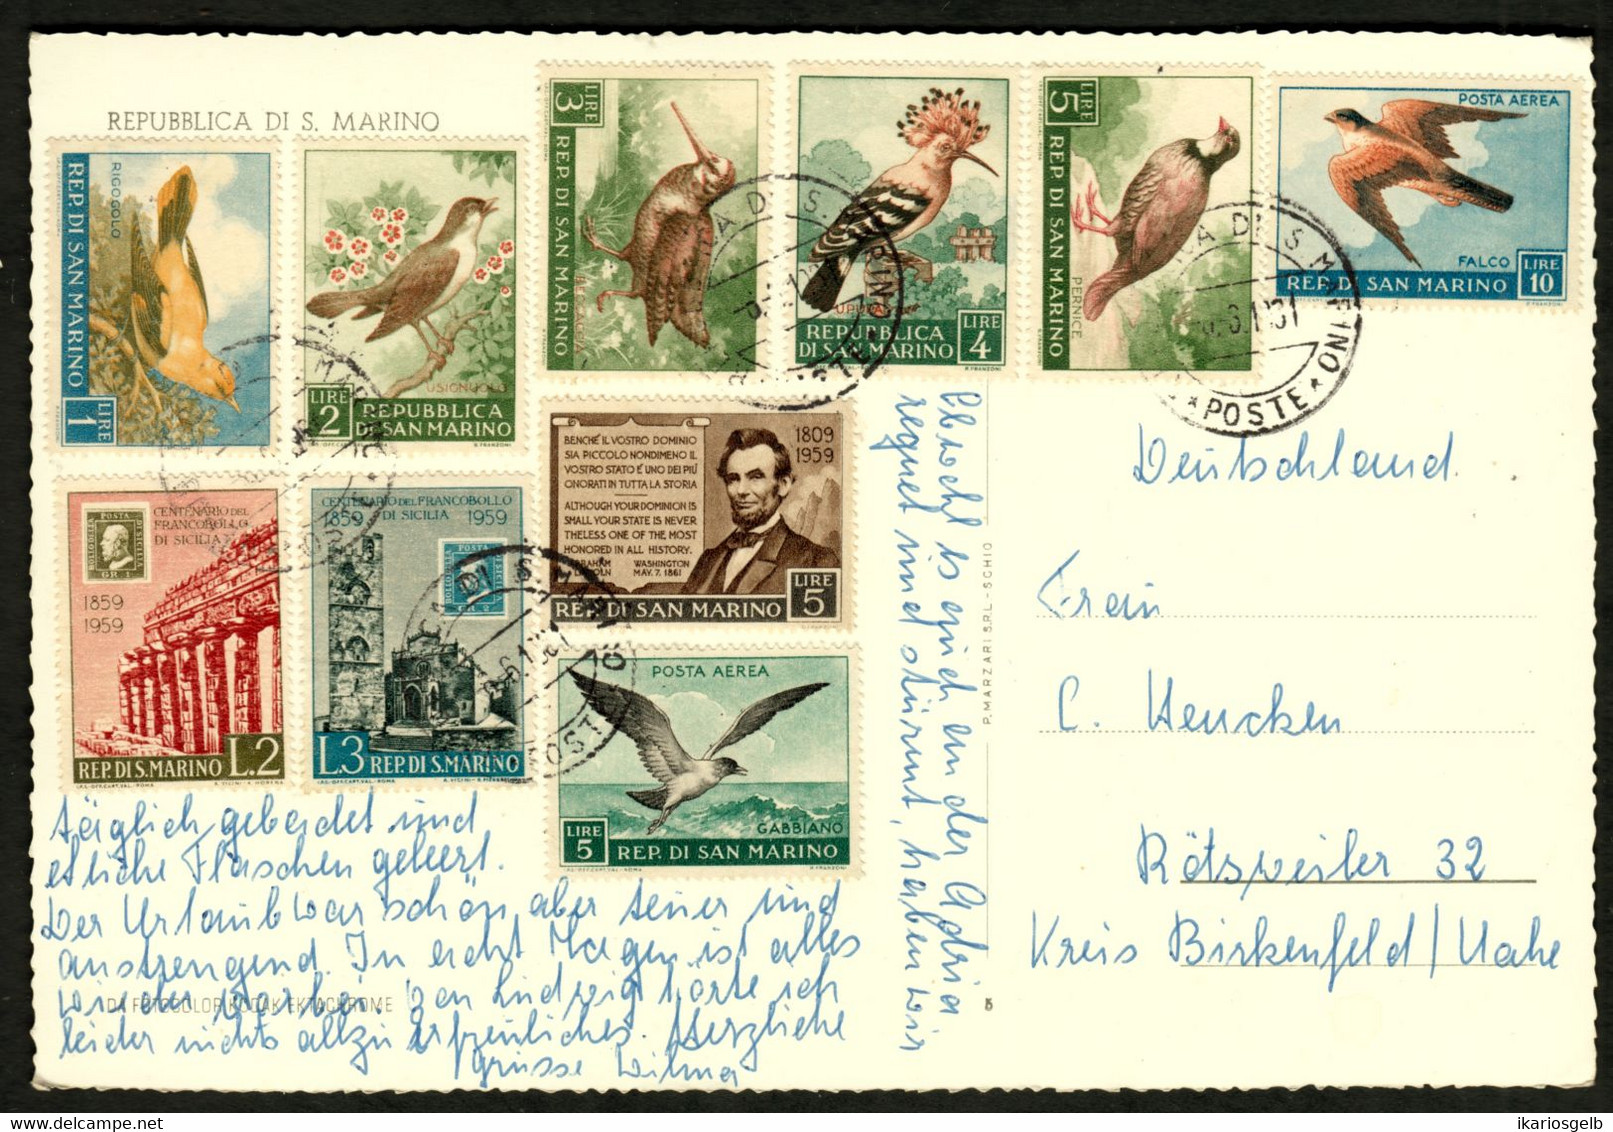 San Marino 1961 Postcard Deco Franked 10 Commemorative Stamps Real Used > Birkenfeld Retsweiler Germany A5 - Covers & Documents